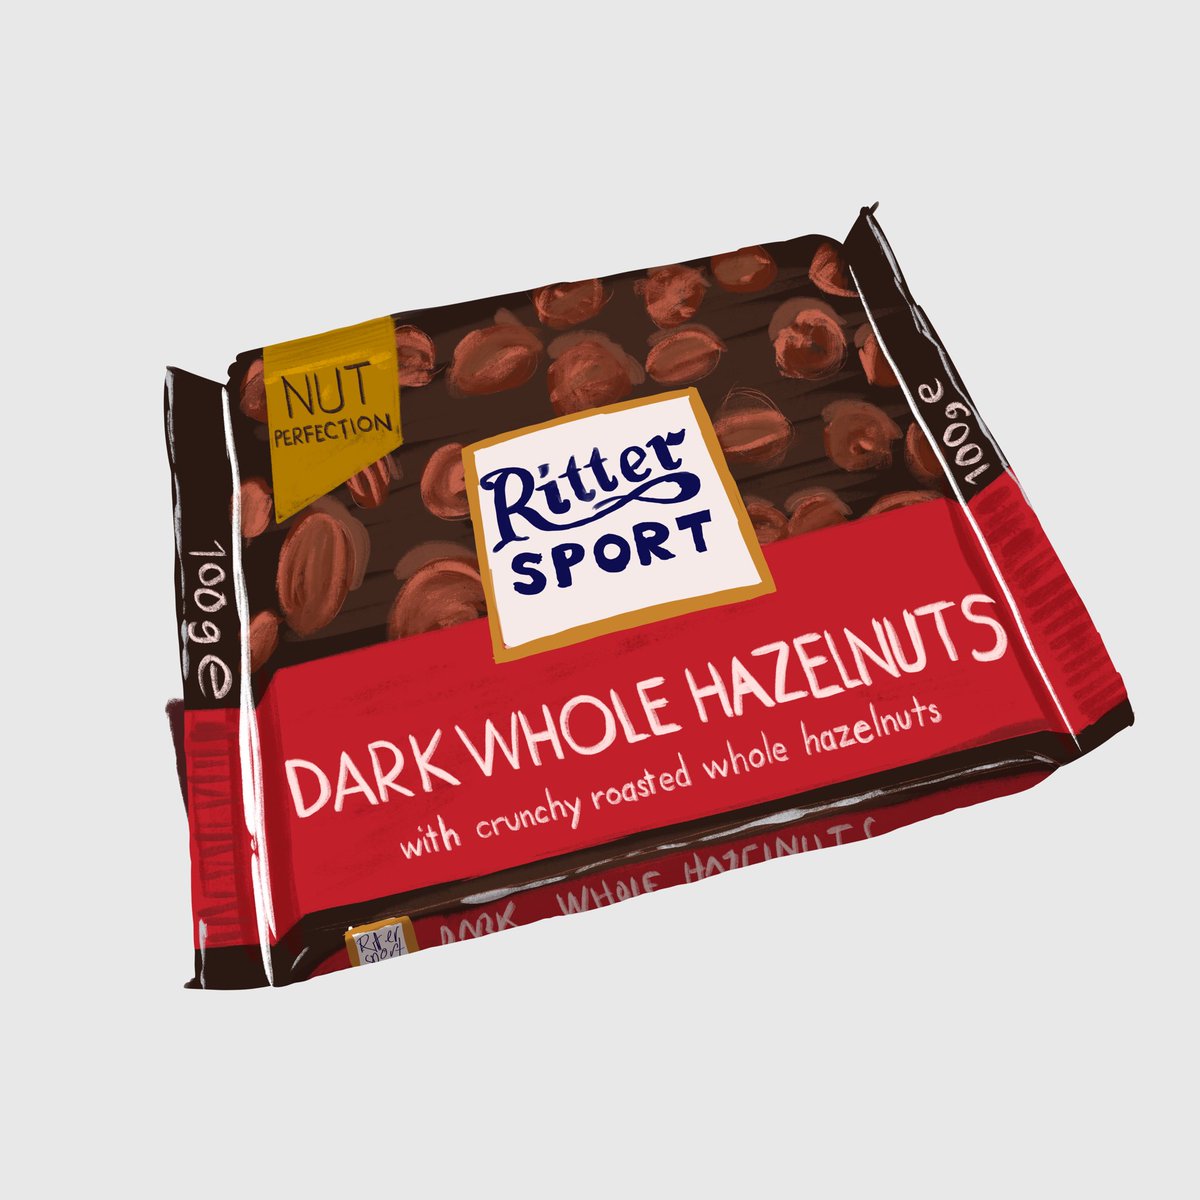 Time for my favourite  #RitterSport, the lovely, salty, nutty, rich Dark Whole Hazelnuts bar.